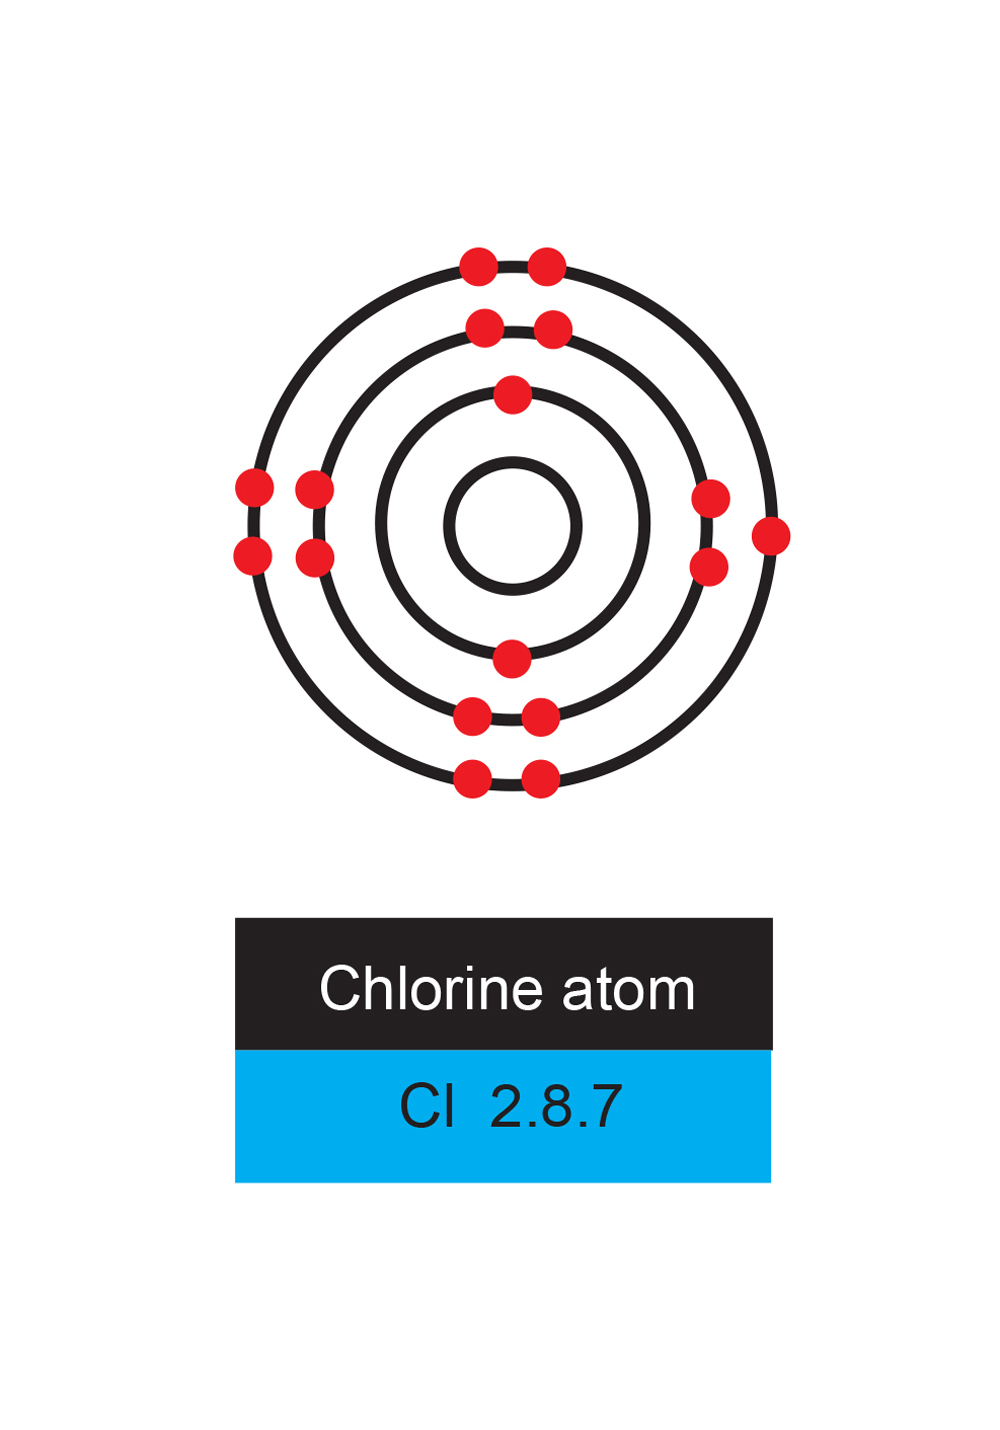 Chlorine needs one more electron to fill its outer orbit and needs it badly so it reacts violently with other atoms